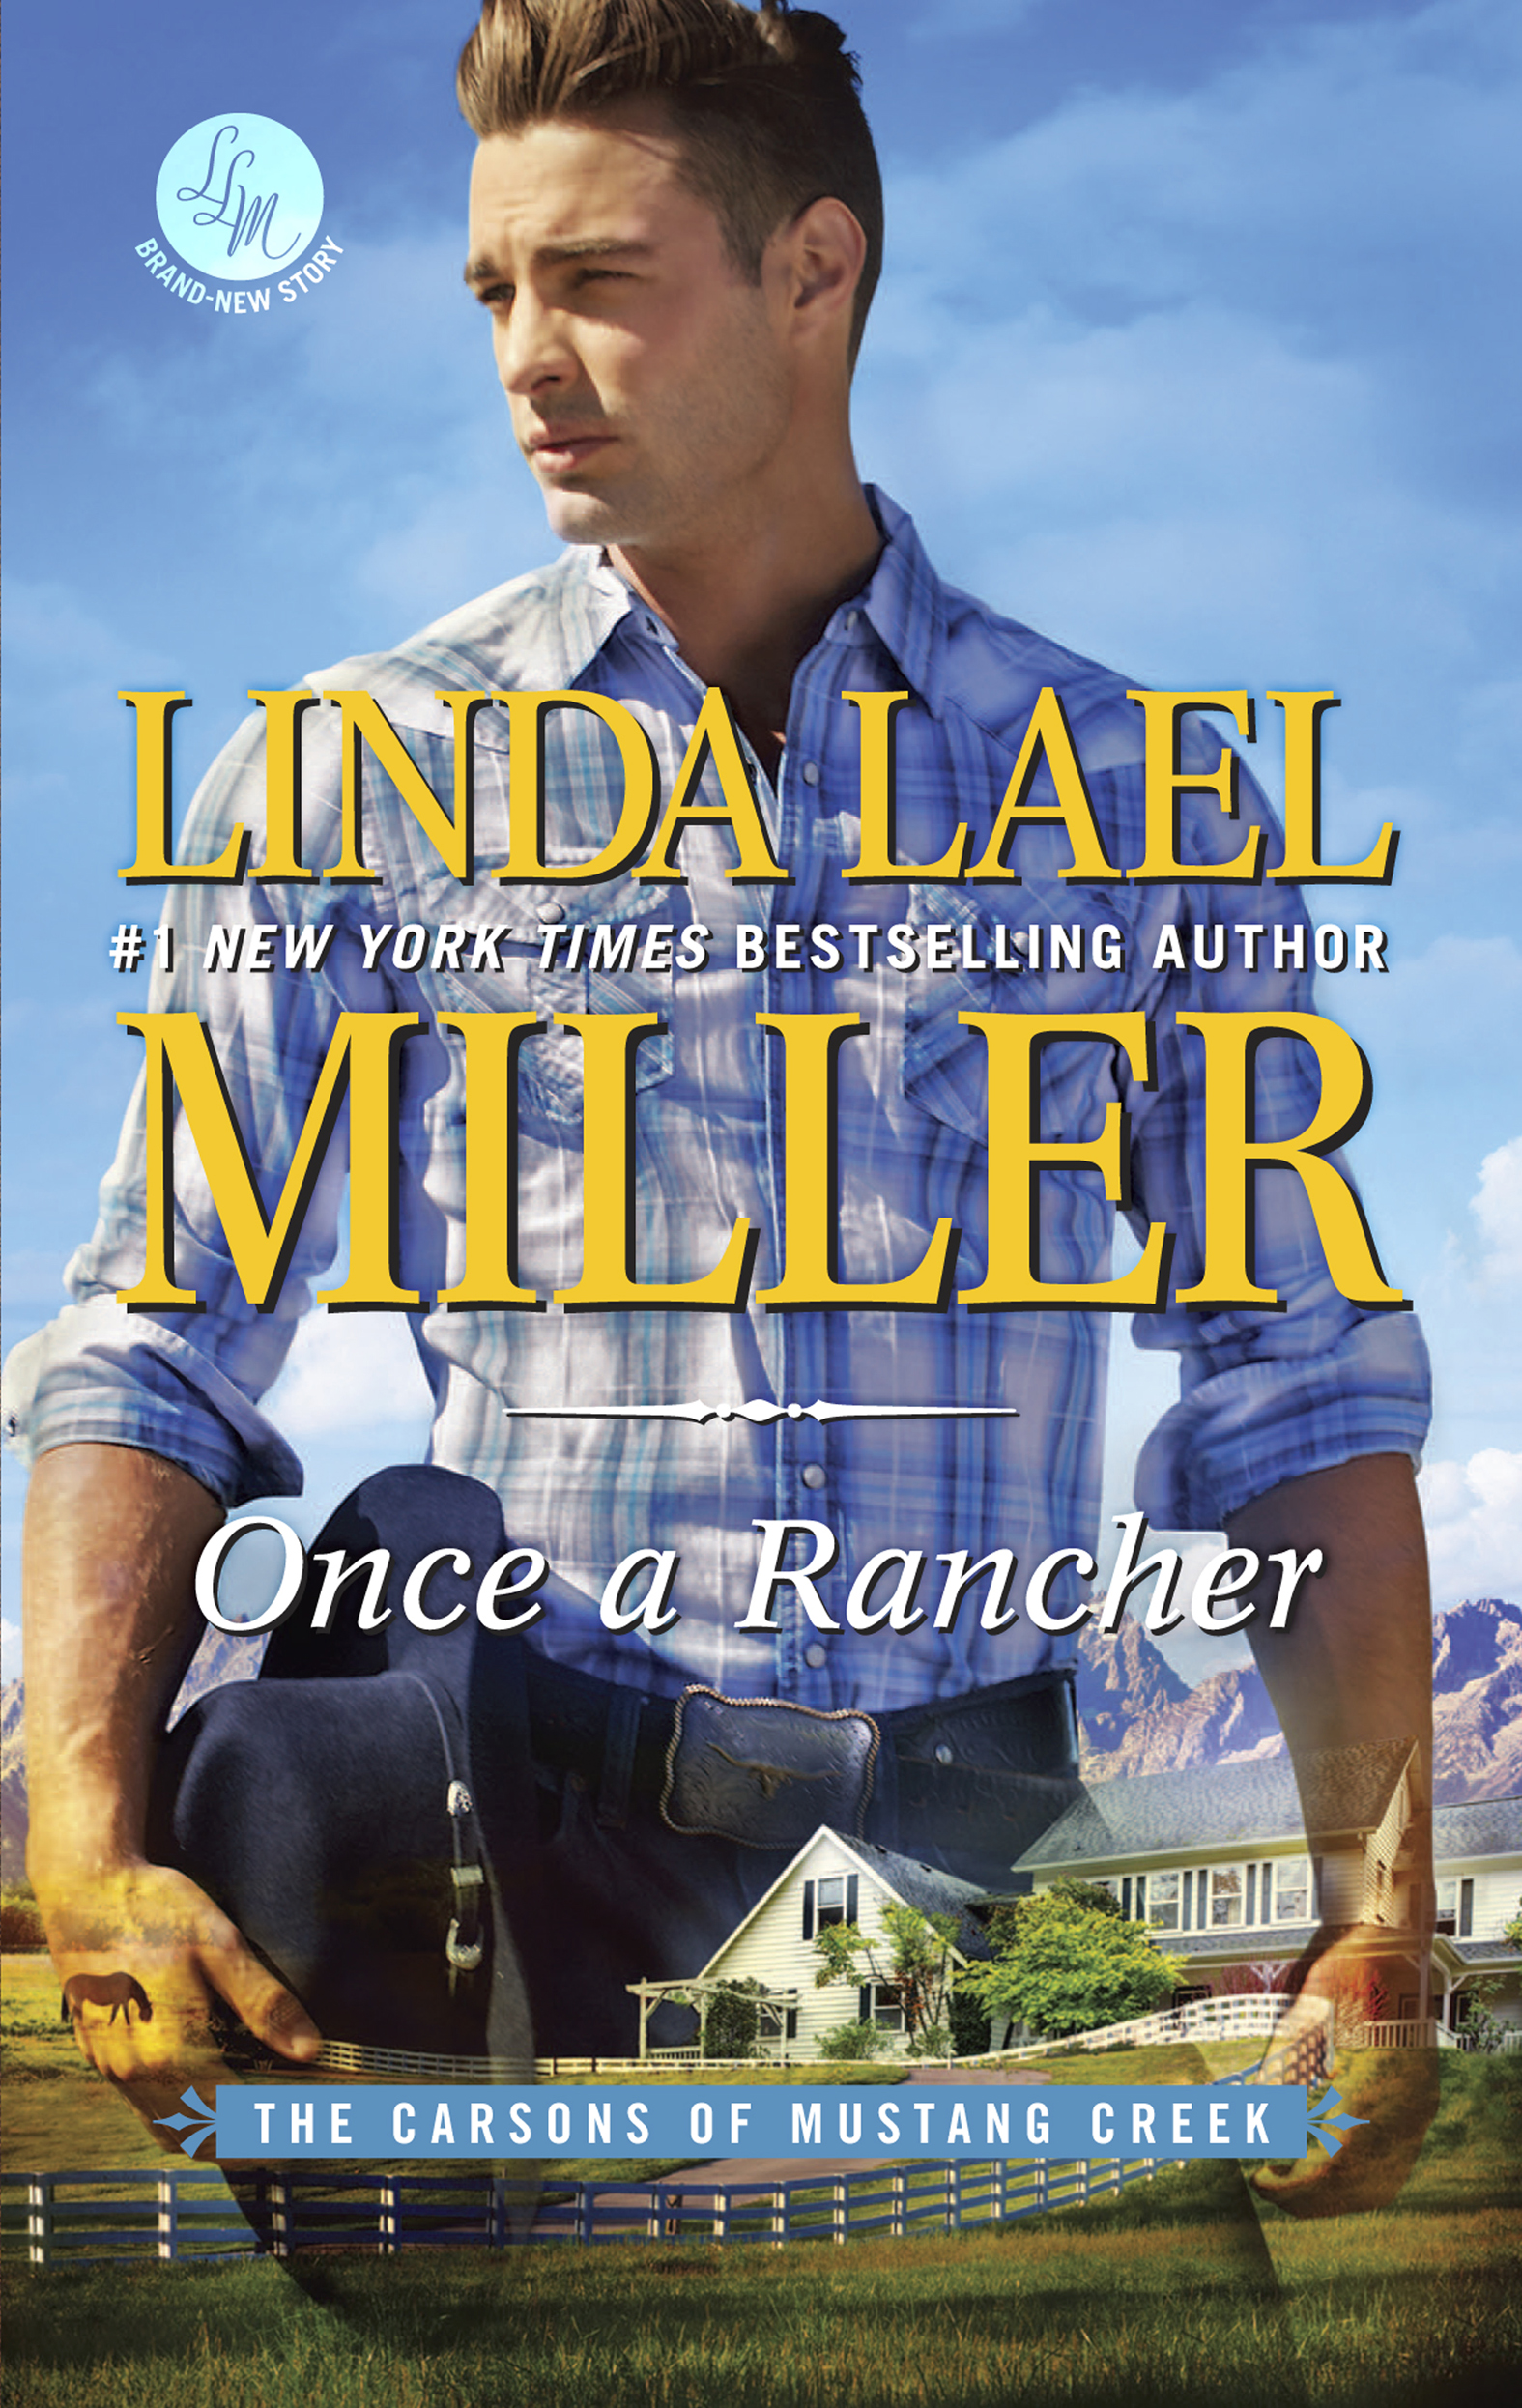 Once a Rancher (2016) by Linda Lael Miller